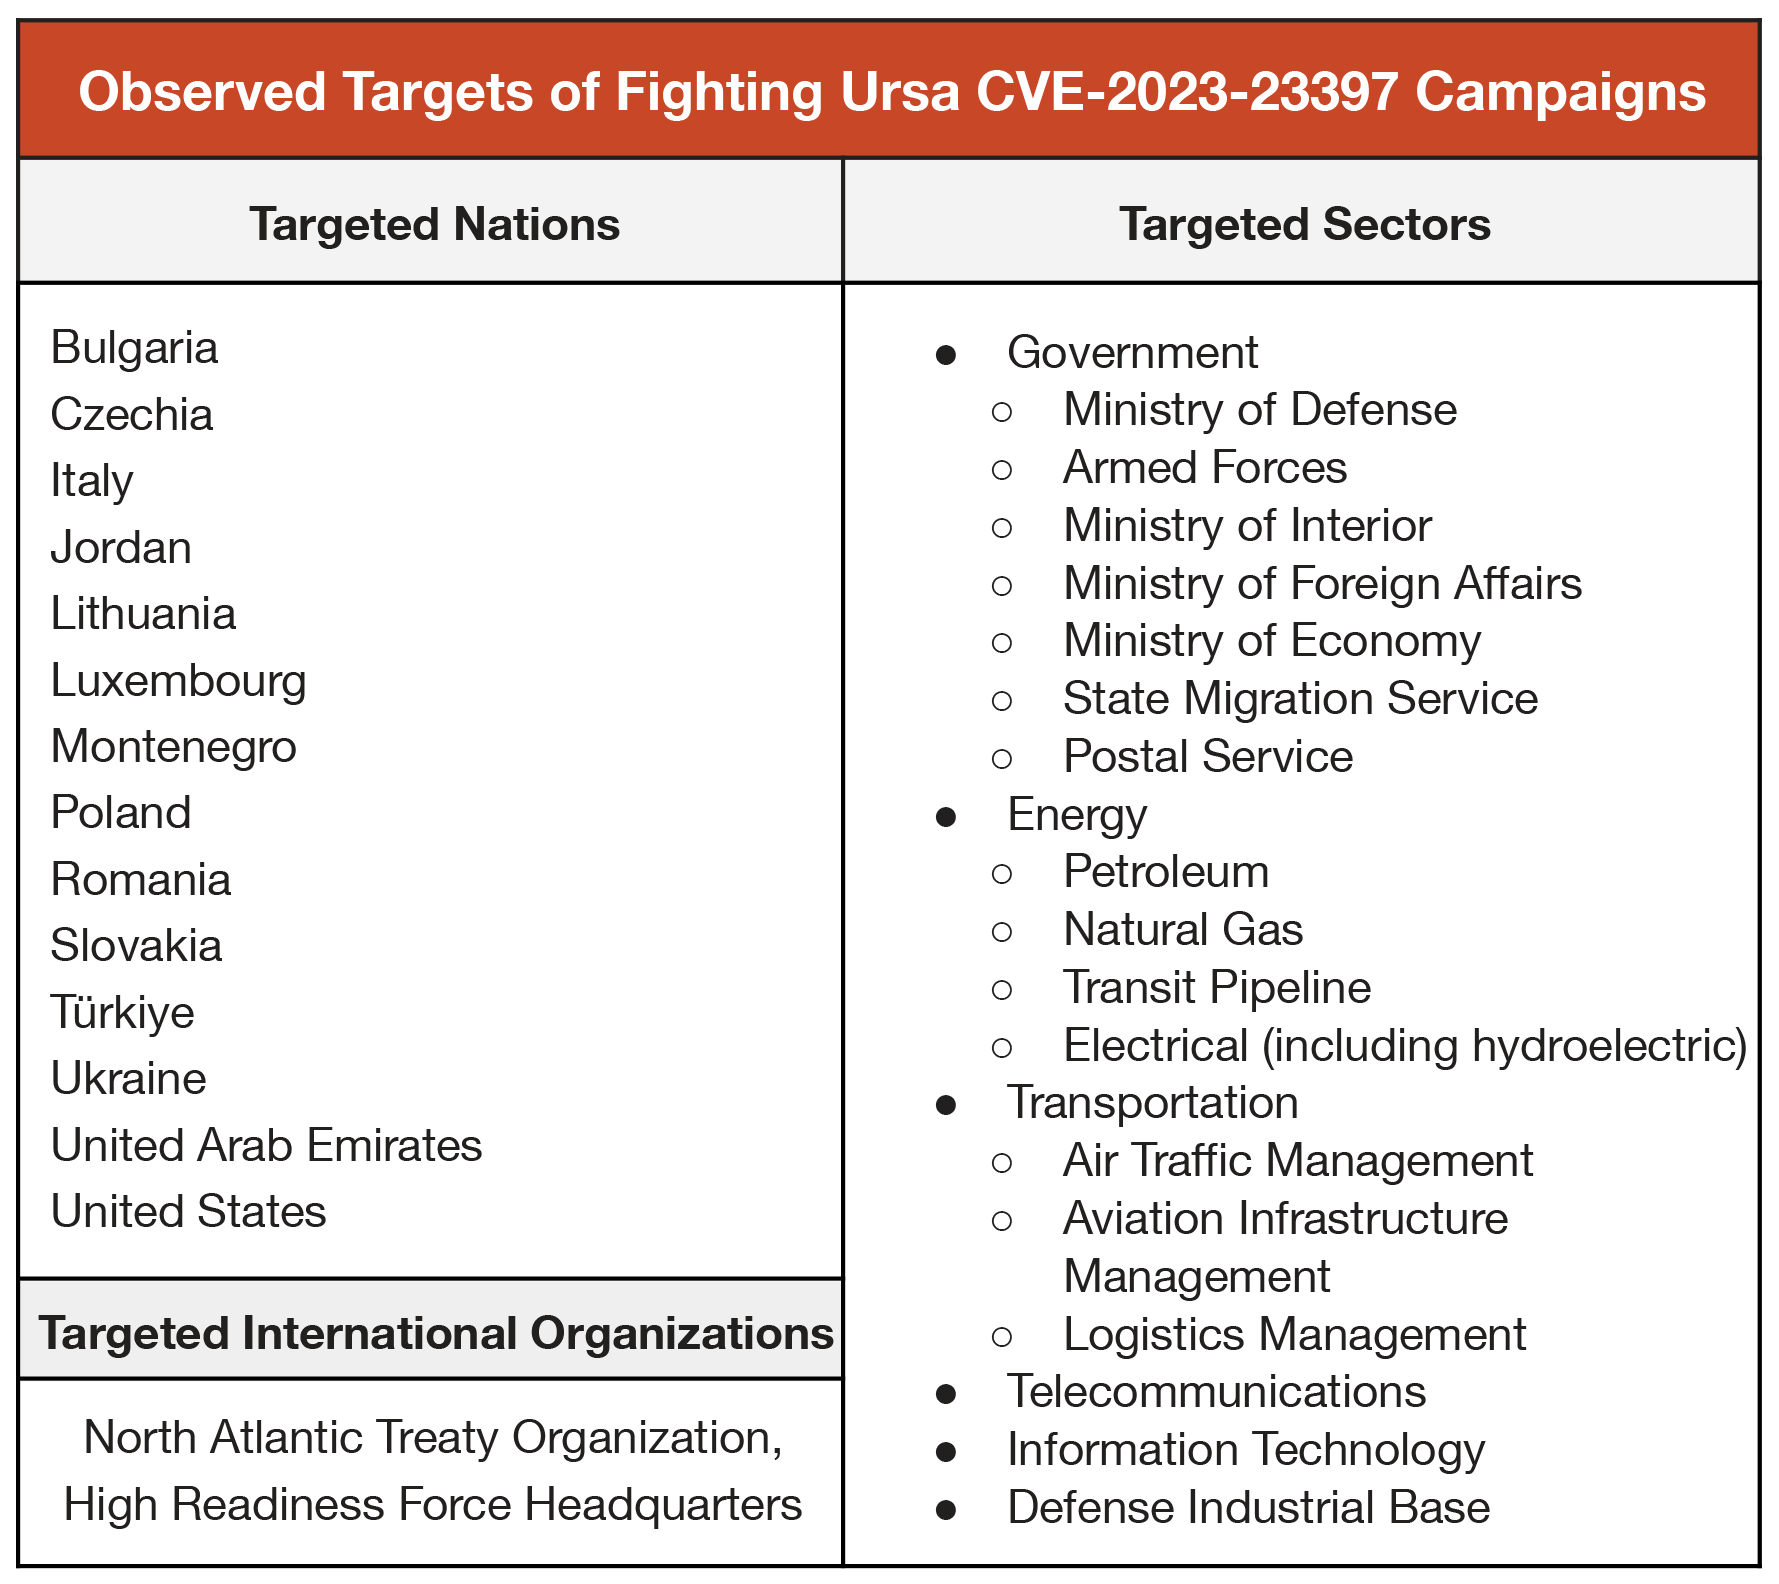 Table of organizations targeted including nations, sectors and international organizations.